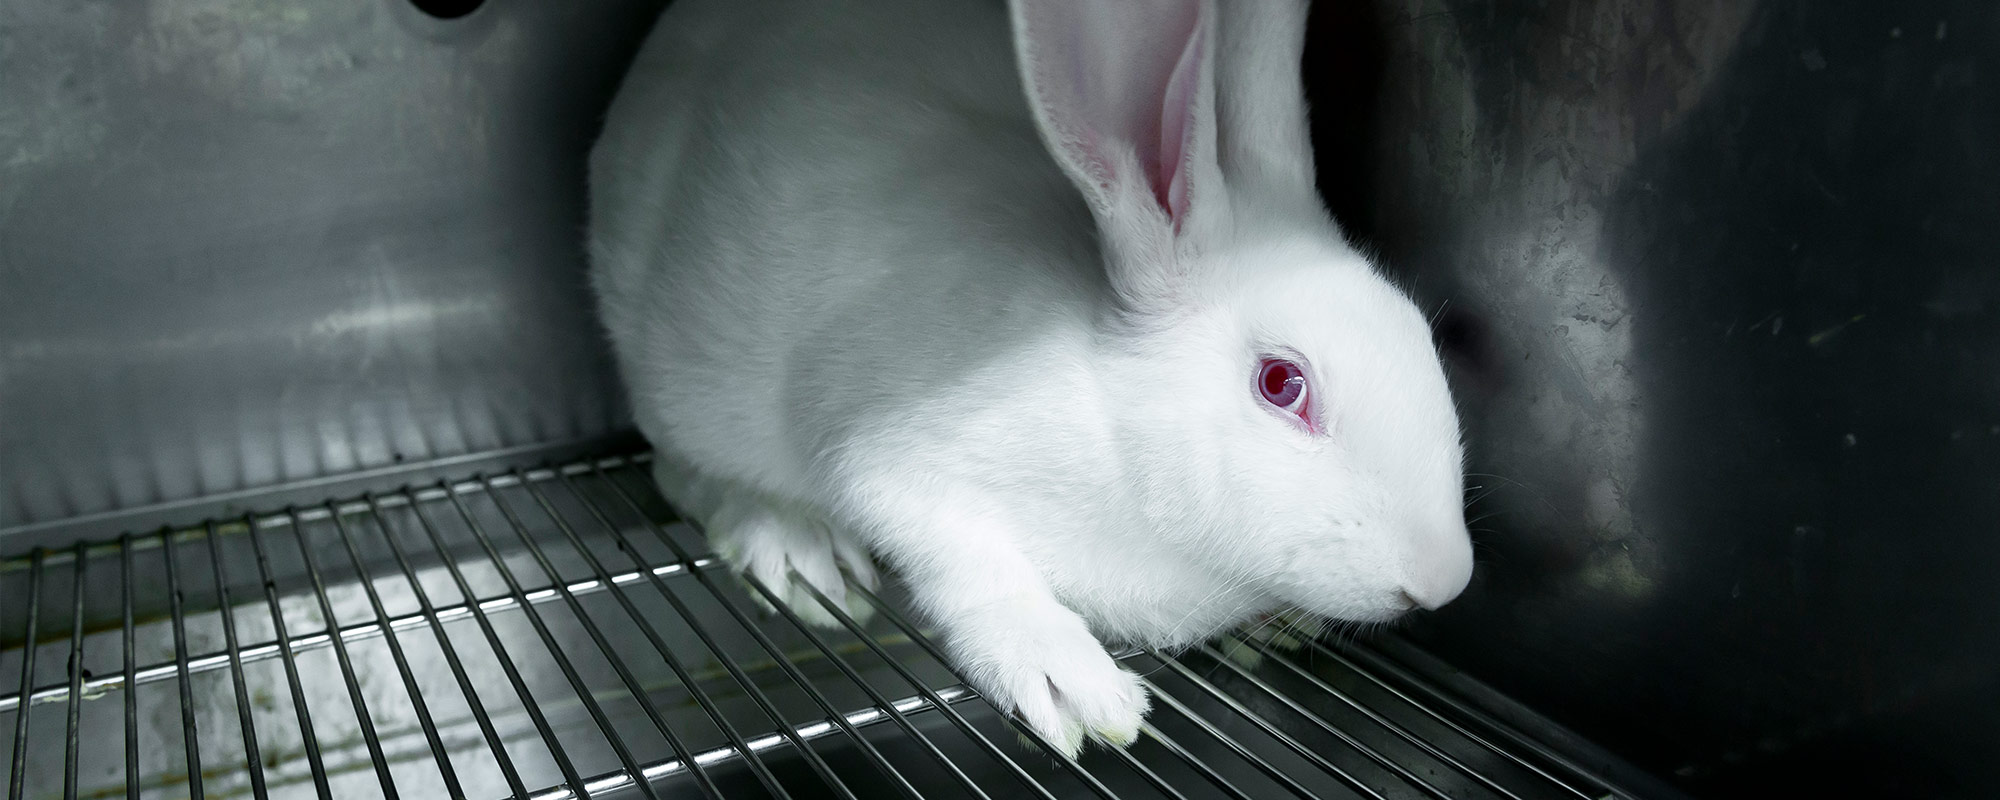 Support cruelty-free cosmetics | The Humane Society of the United States